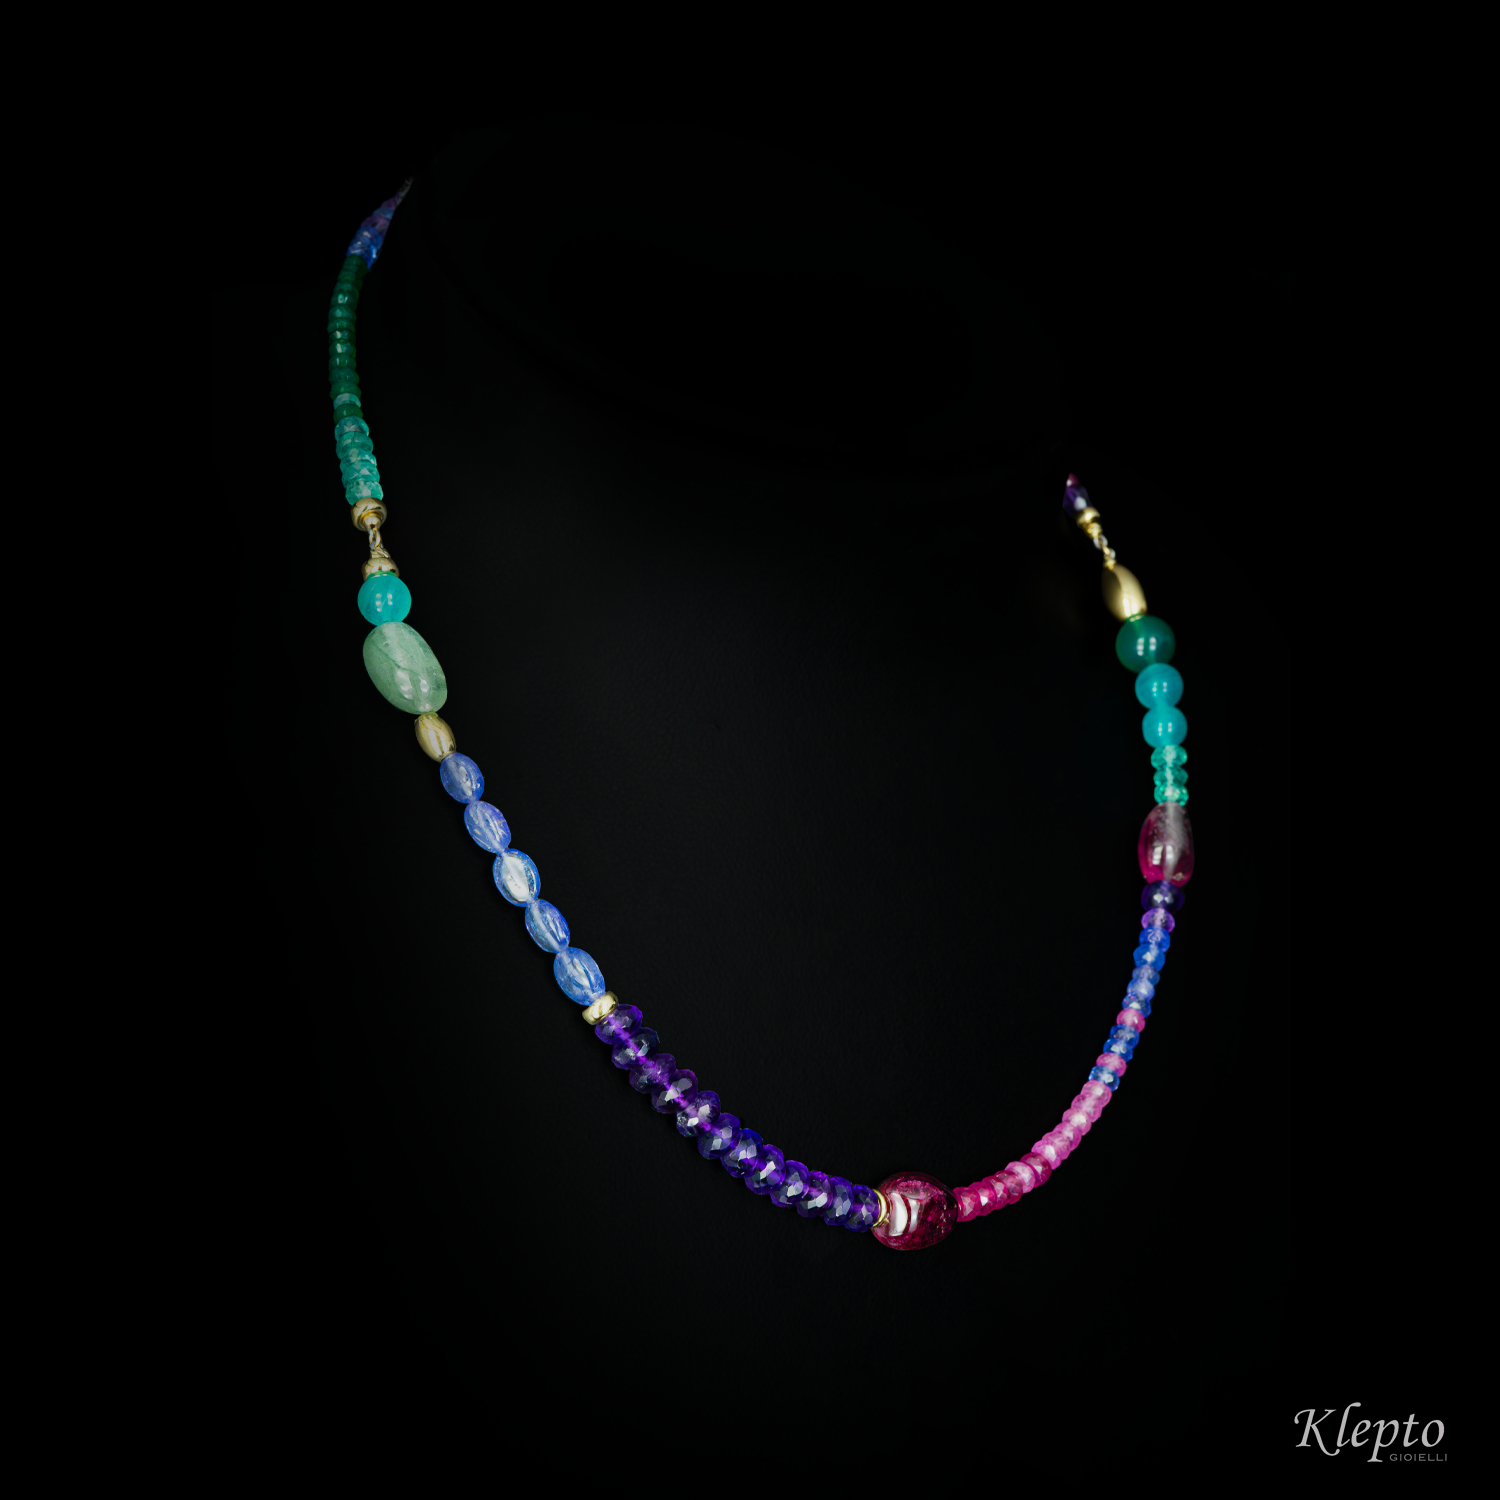 Short Rainbow necklace with large stones